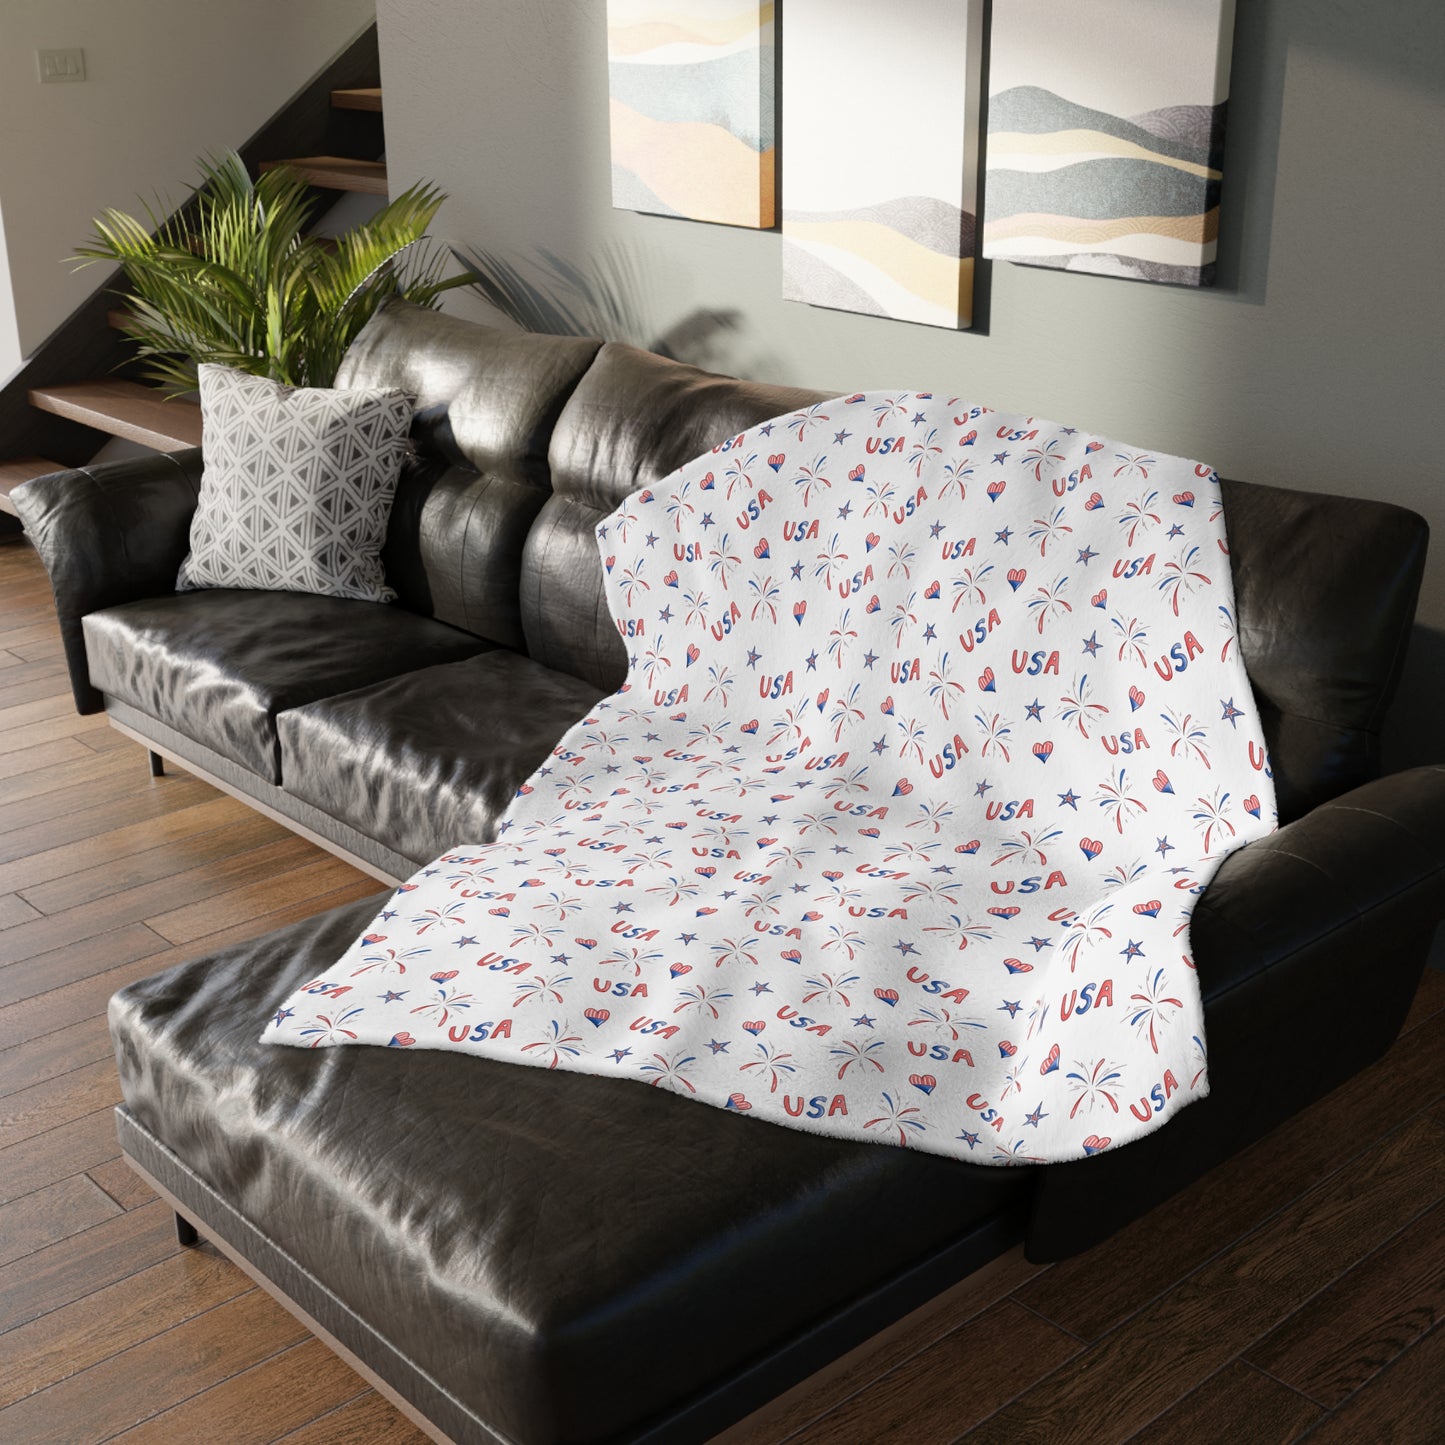 Hearts and Fireworks Velveteen Minky Blanket (Two-sided print)